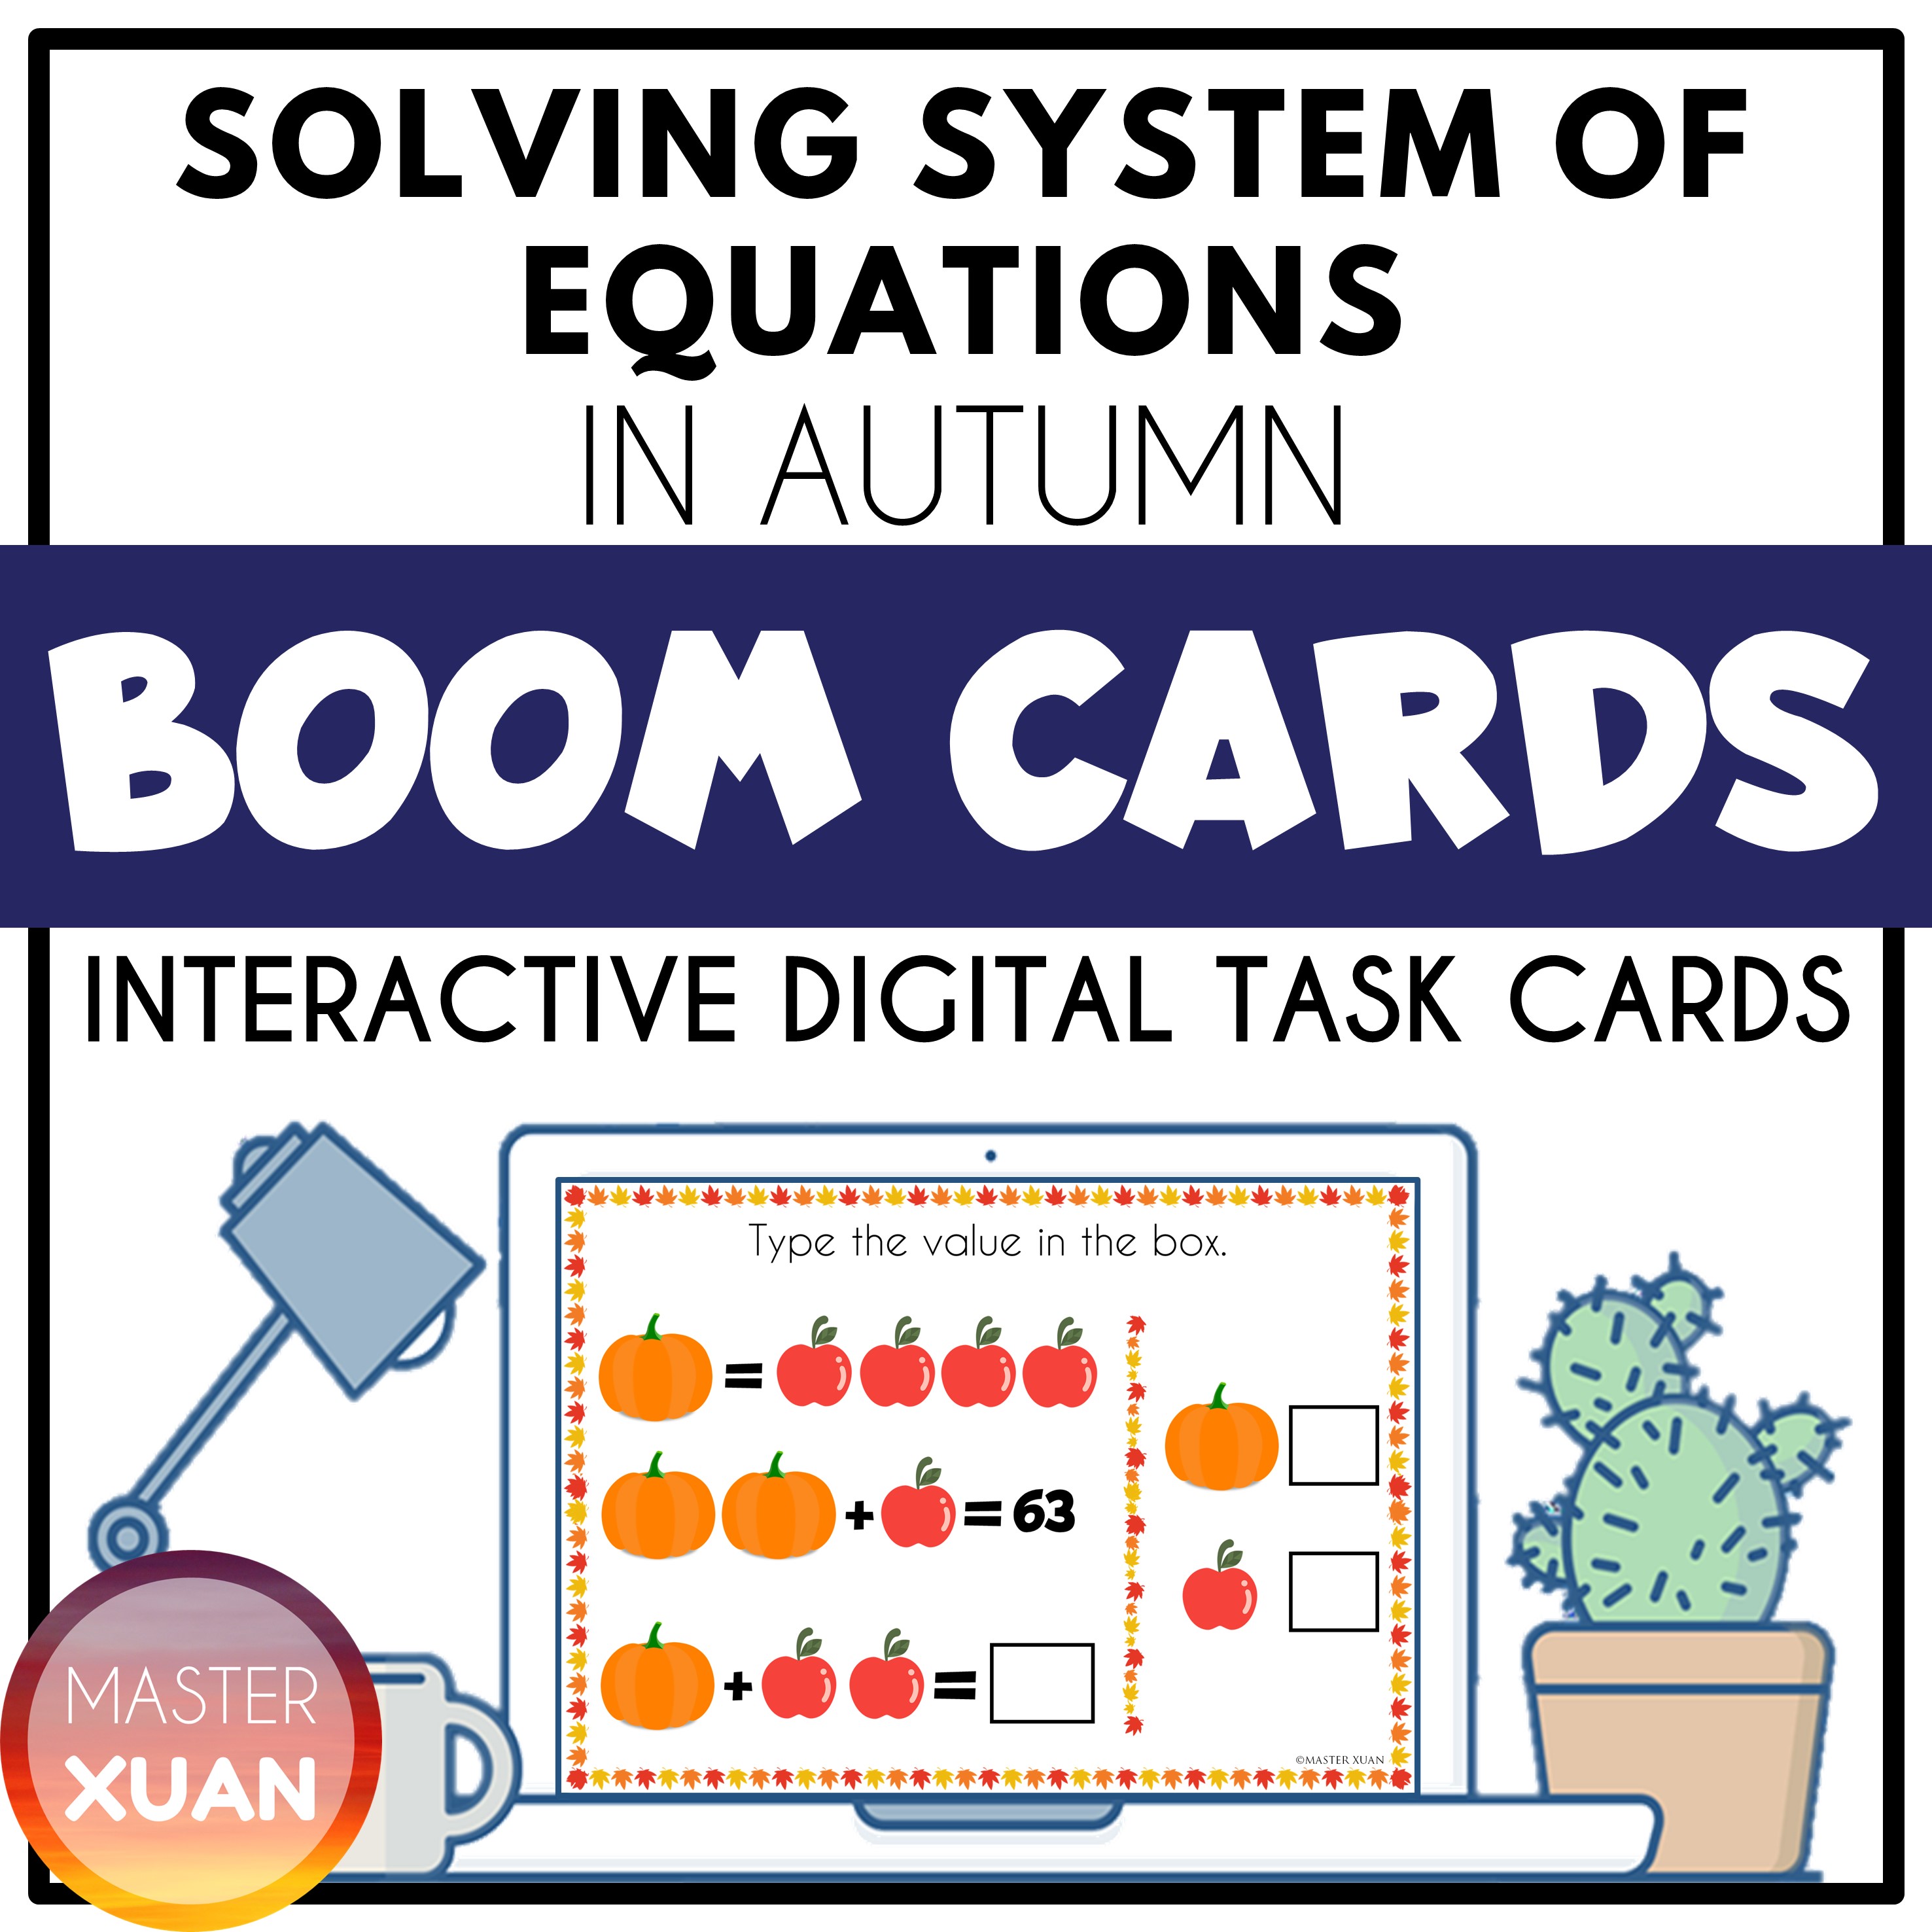 Solving System of Equations in Autumn Boom Cards Cover